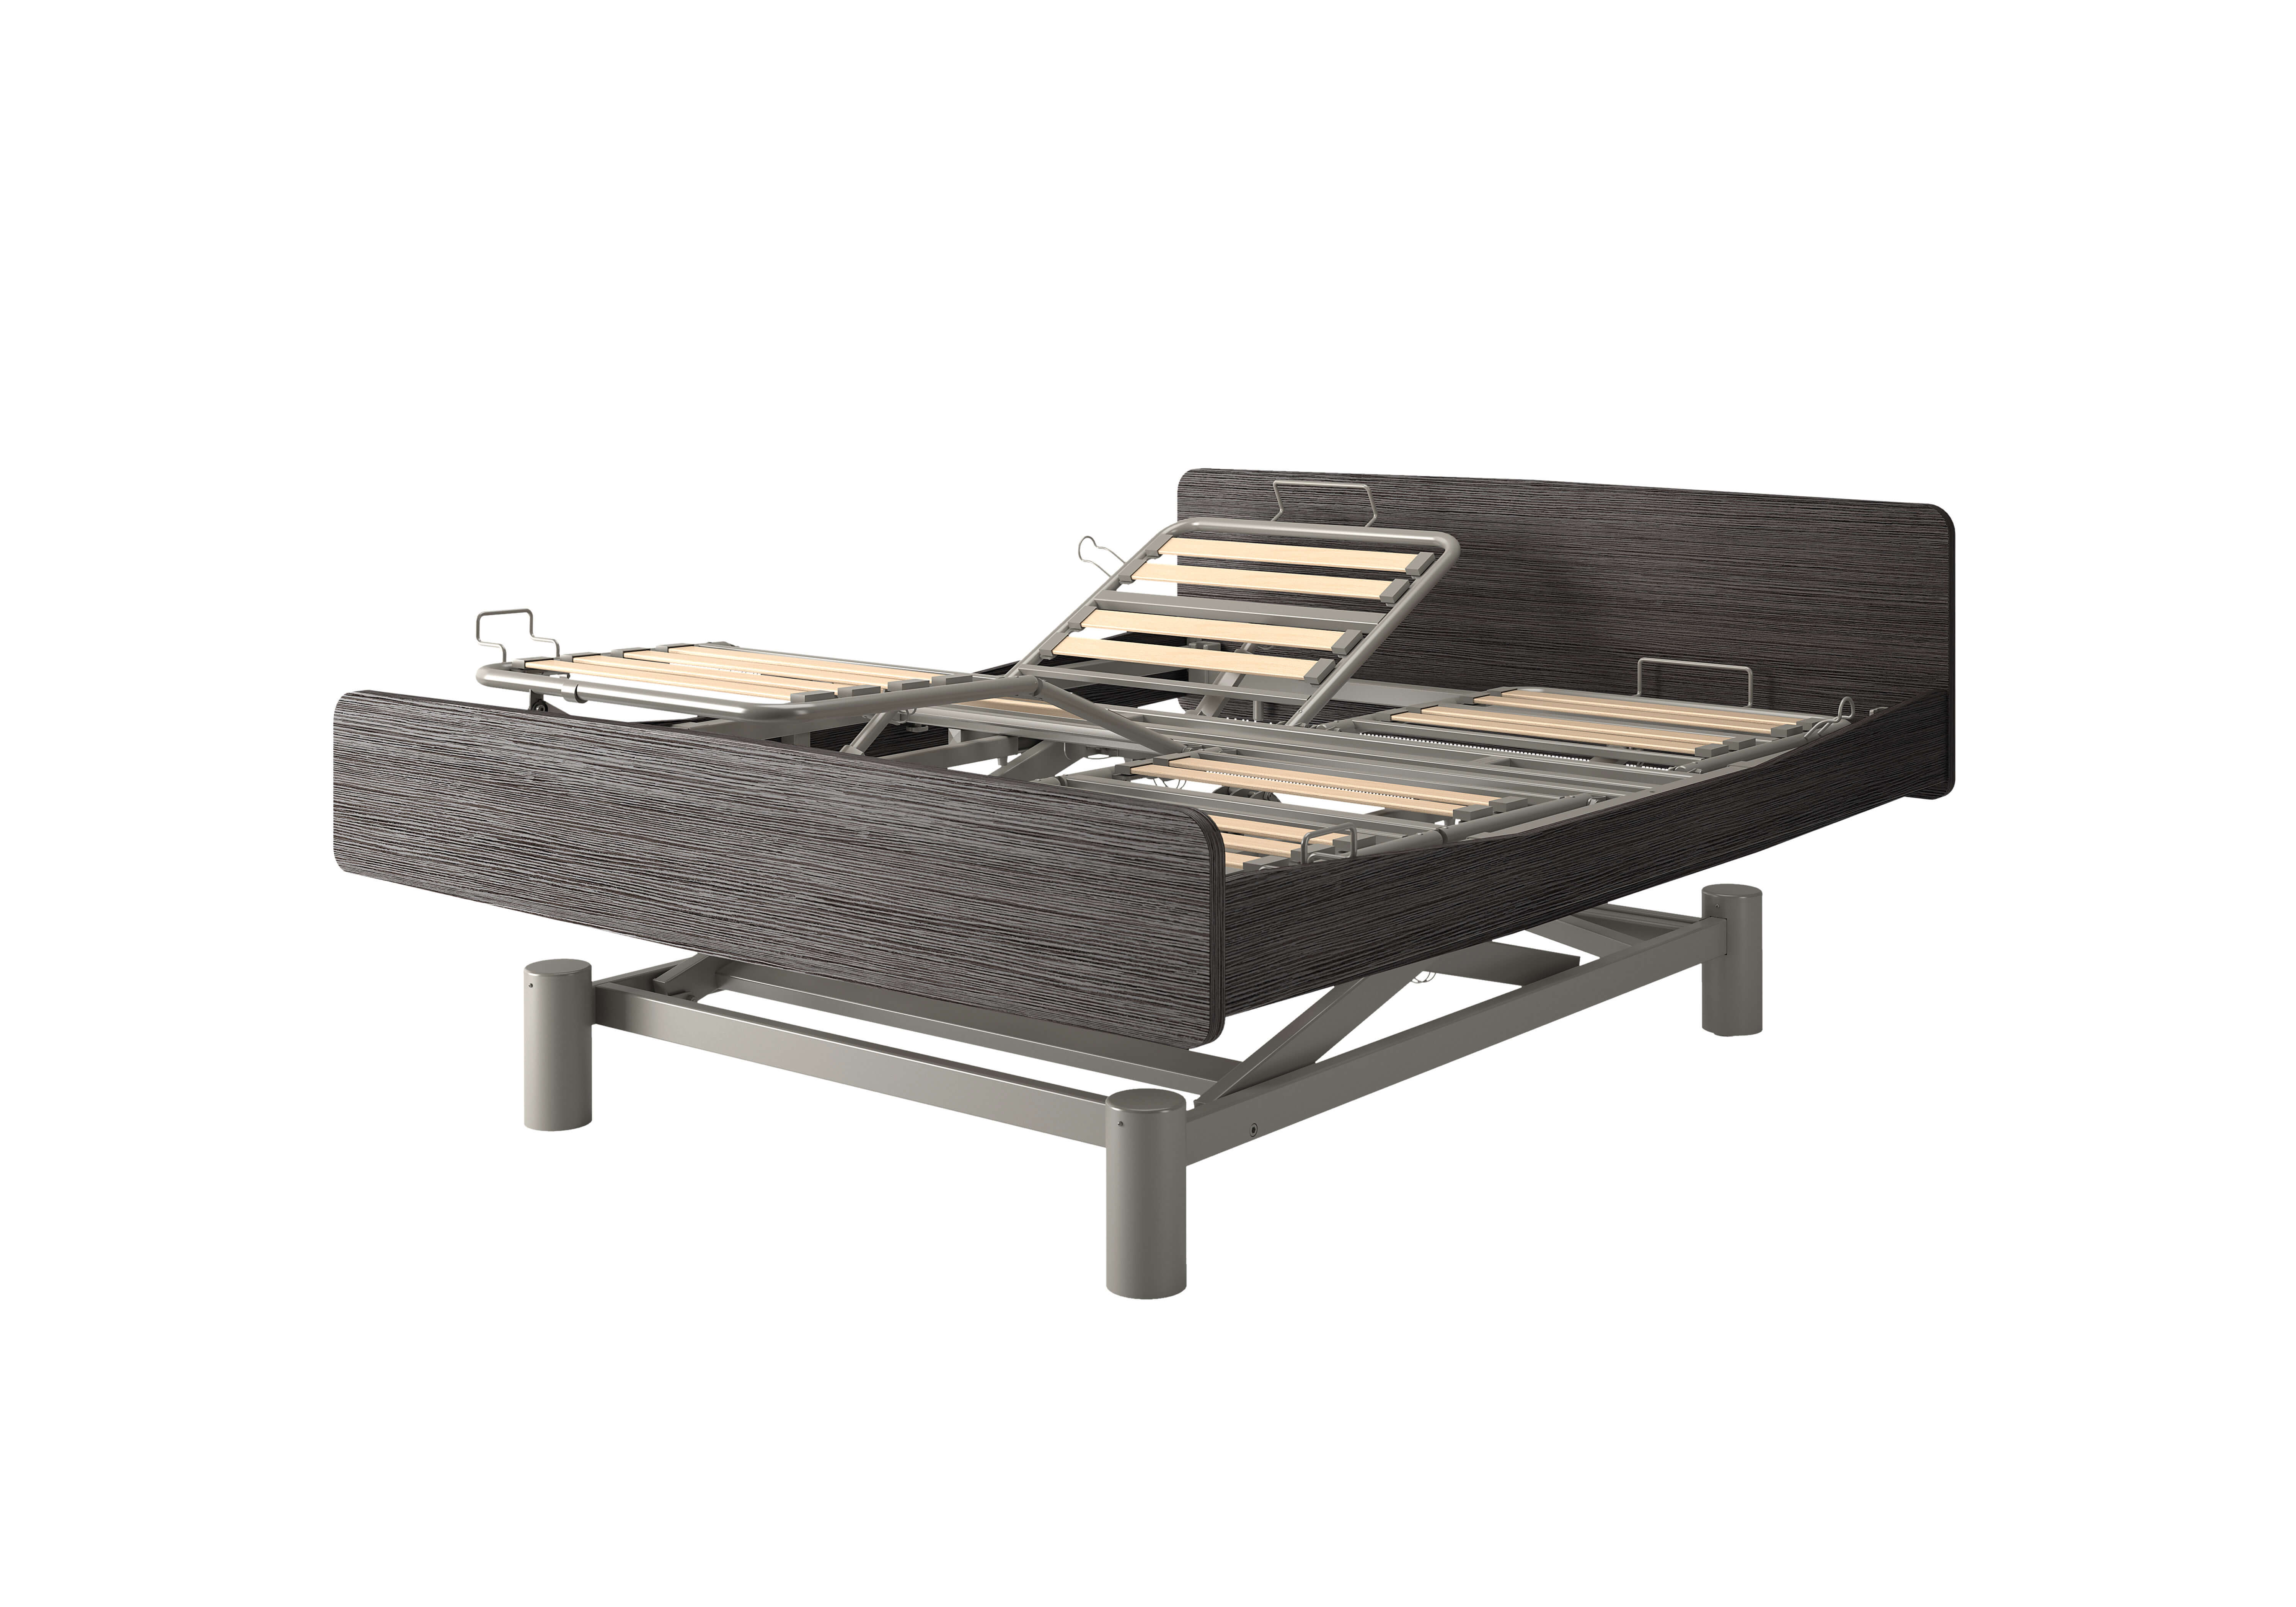 Image of adjustable bed without mattress.